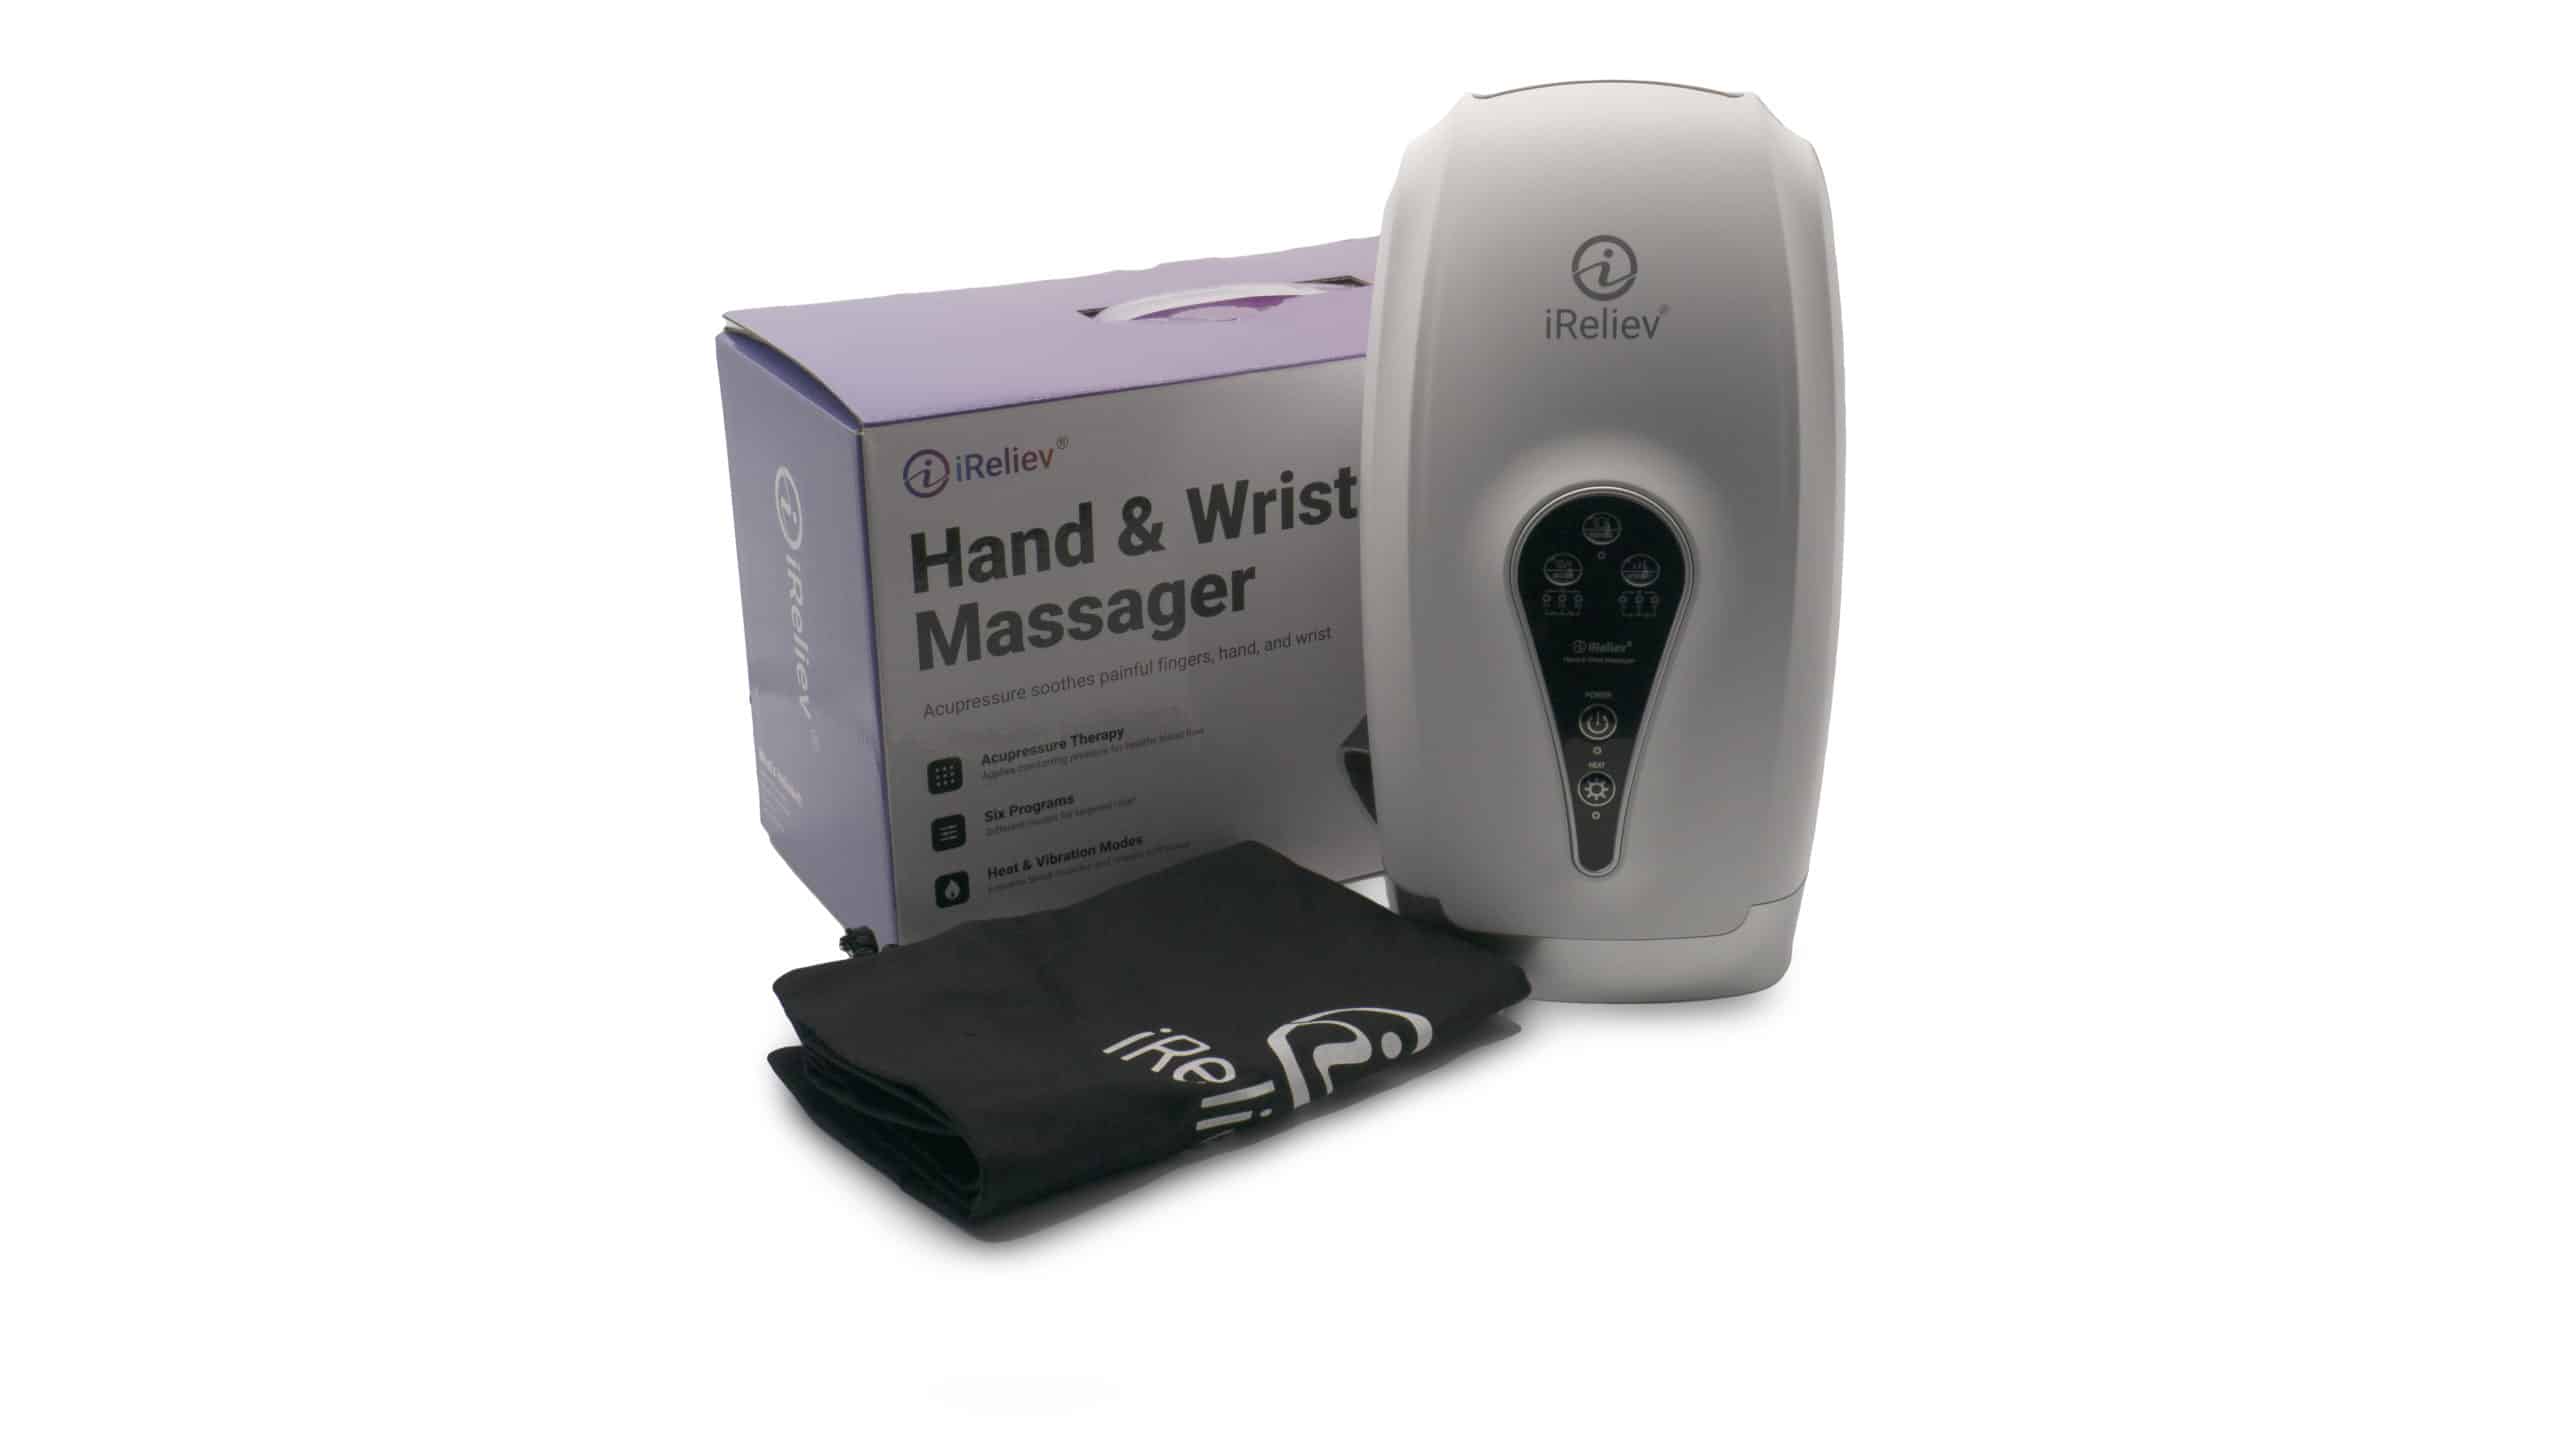 ireliev hand massager, travel bag, and box